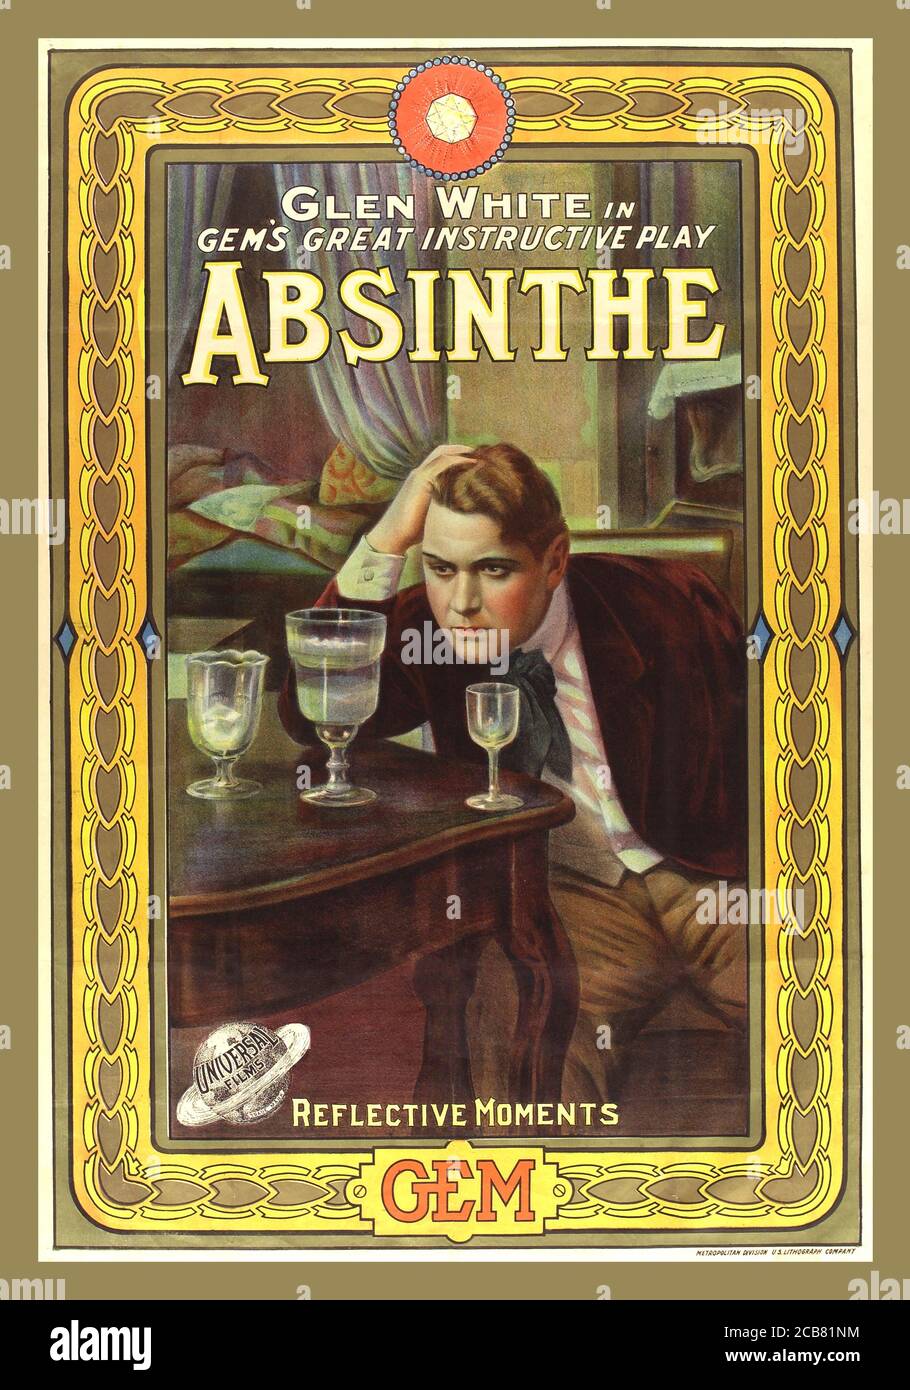 Vintage Movie Cinema poster 1900’s  Absinthe alcoholic addict looking at three different sized glasses on a table; Advertisement promotion for film 'Absinthe' by the Gem Motion Picture Company. Glen White in Gem’s great instructive play ‘ABSINTHE’ Lithograph 1913 By Gem Motion Picture Company . Universal Films Reflective Moments Stock Photo